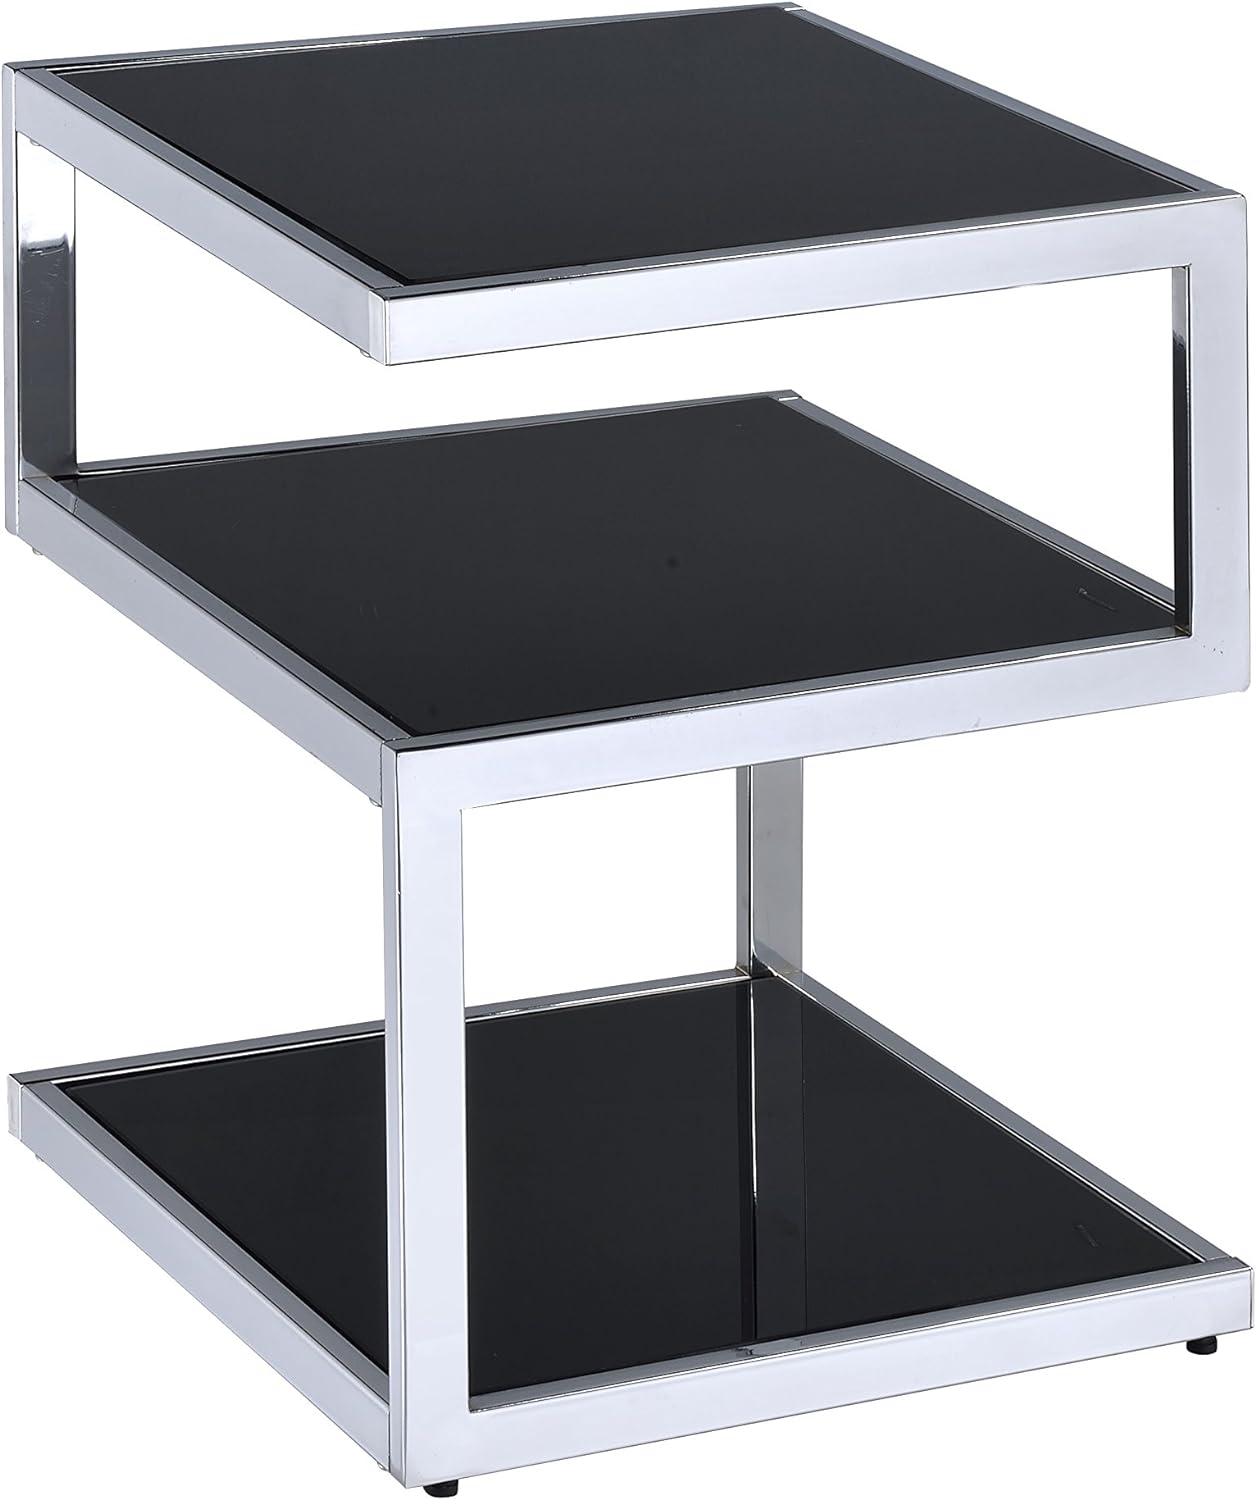 3-Tier Alyea End Table Side Table with Glass Top